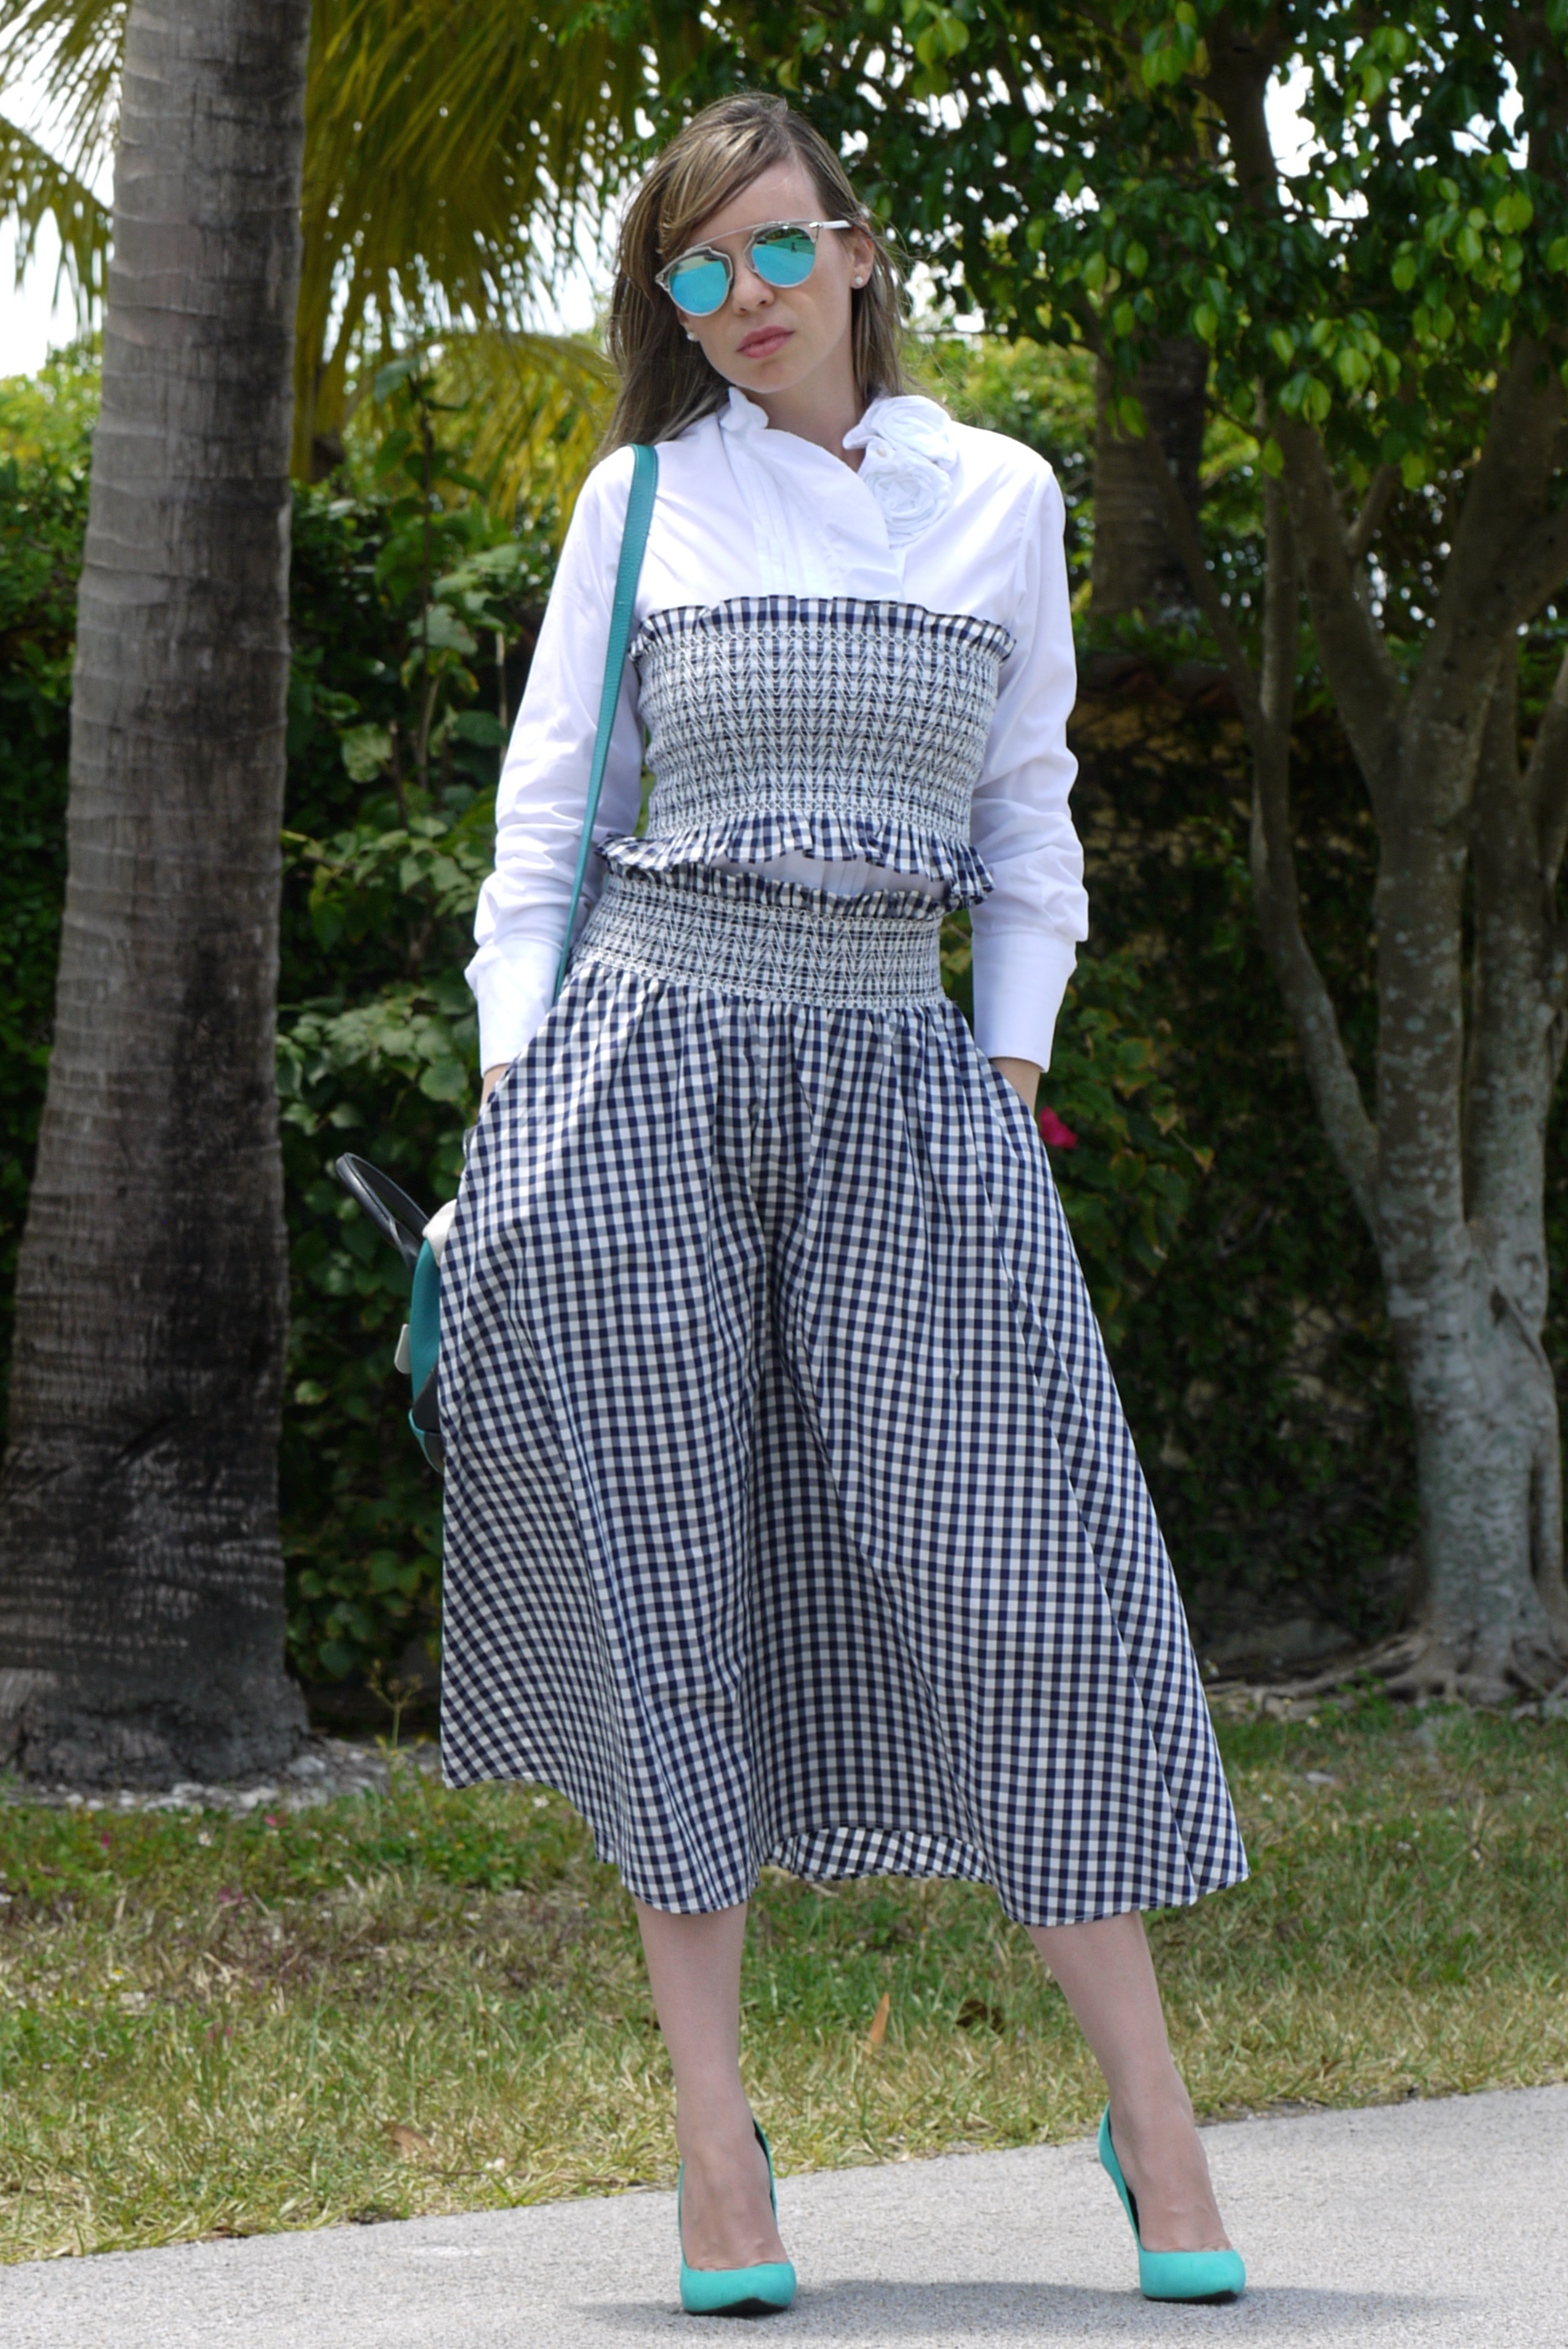 Gingham set over white shirt + Stilettos by mylovelypeople